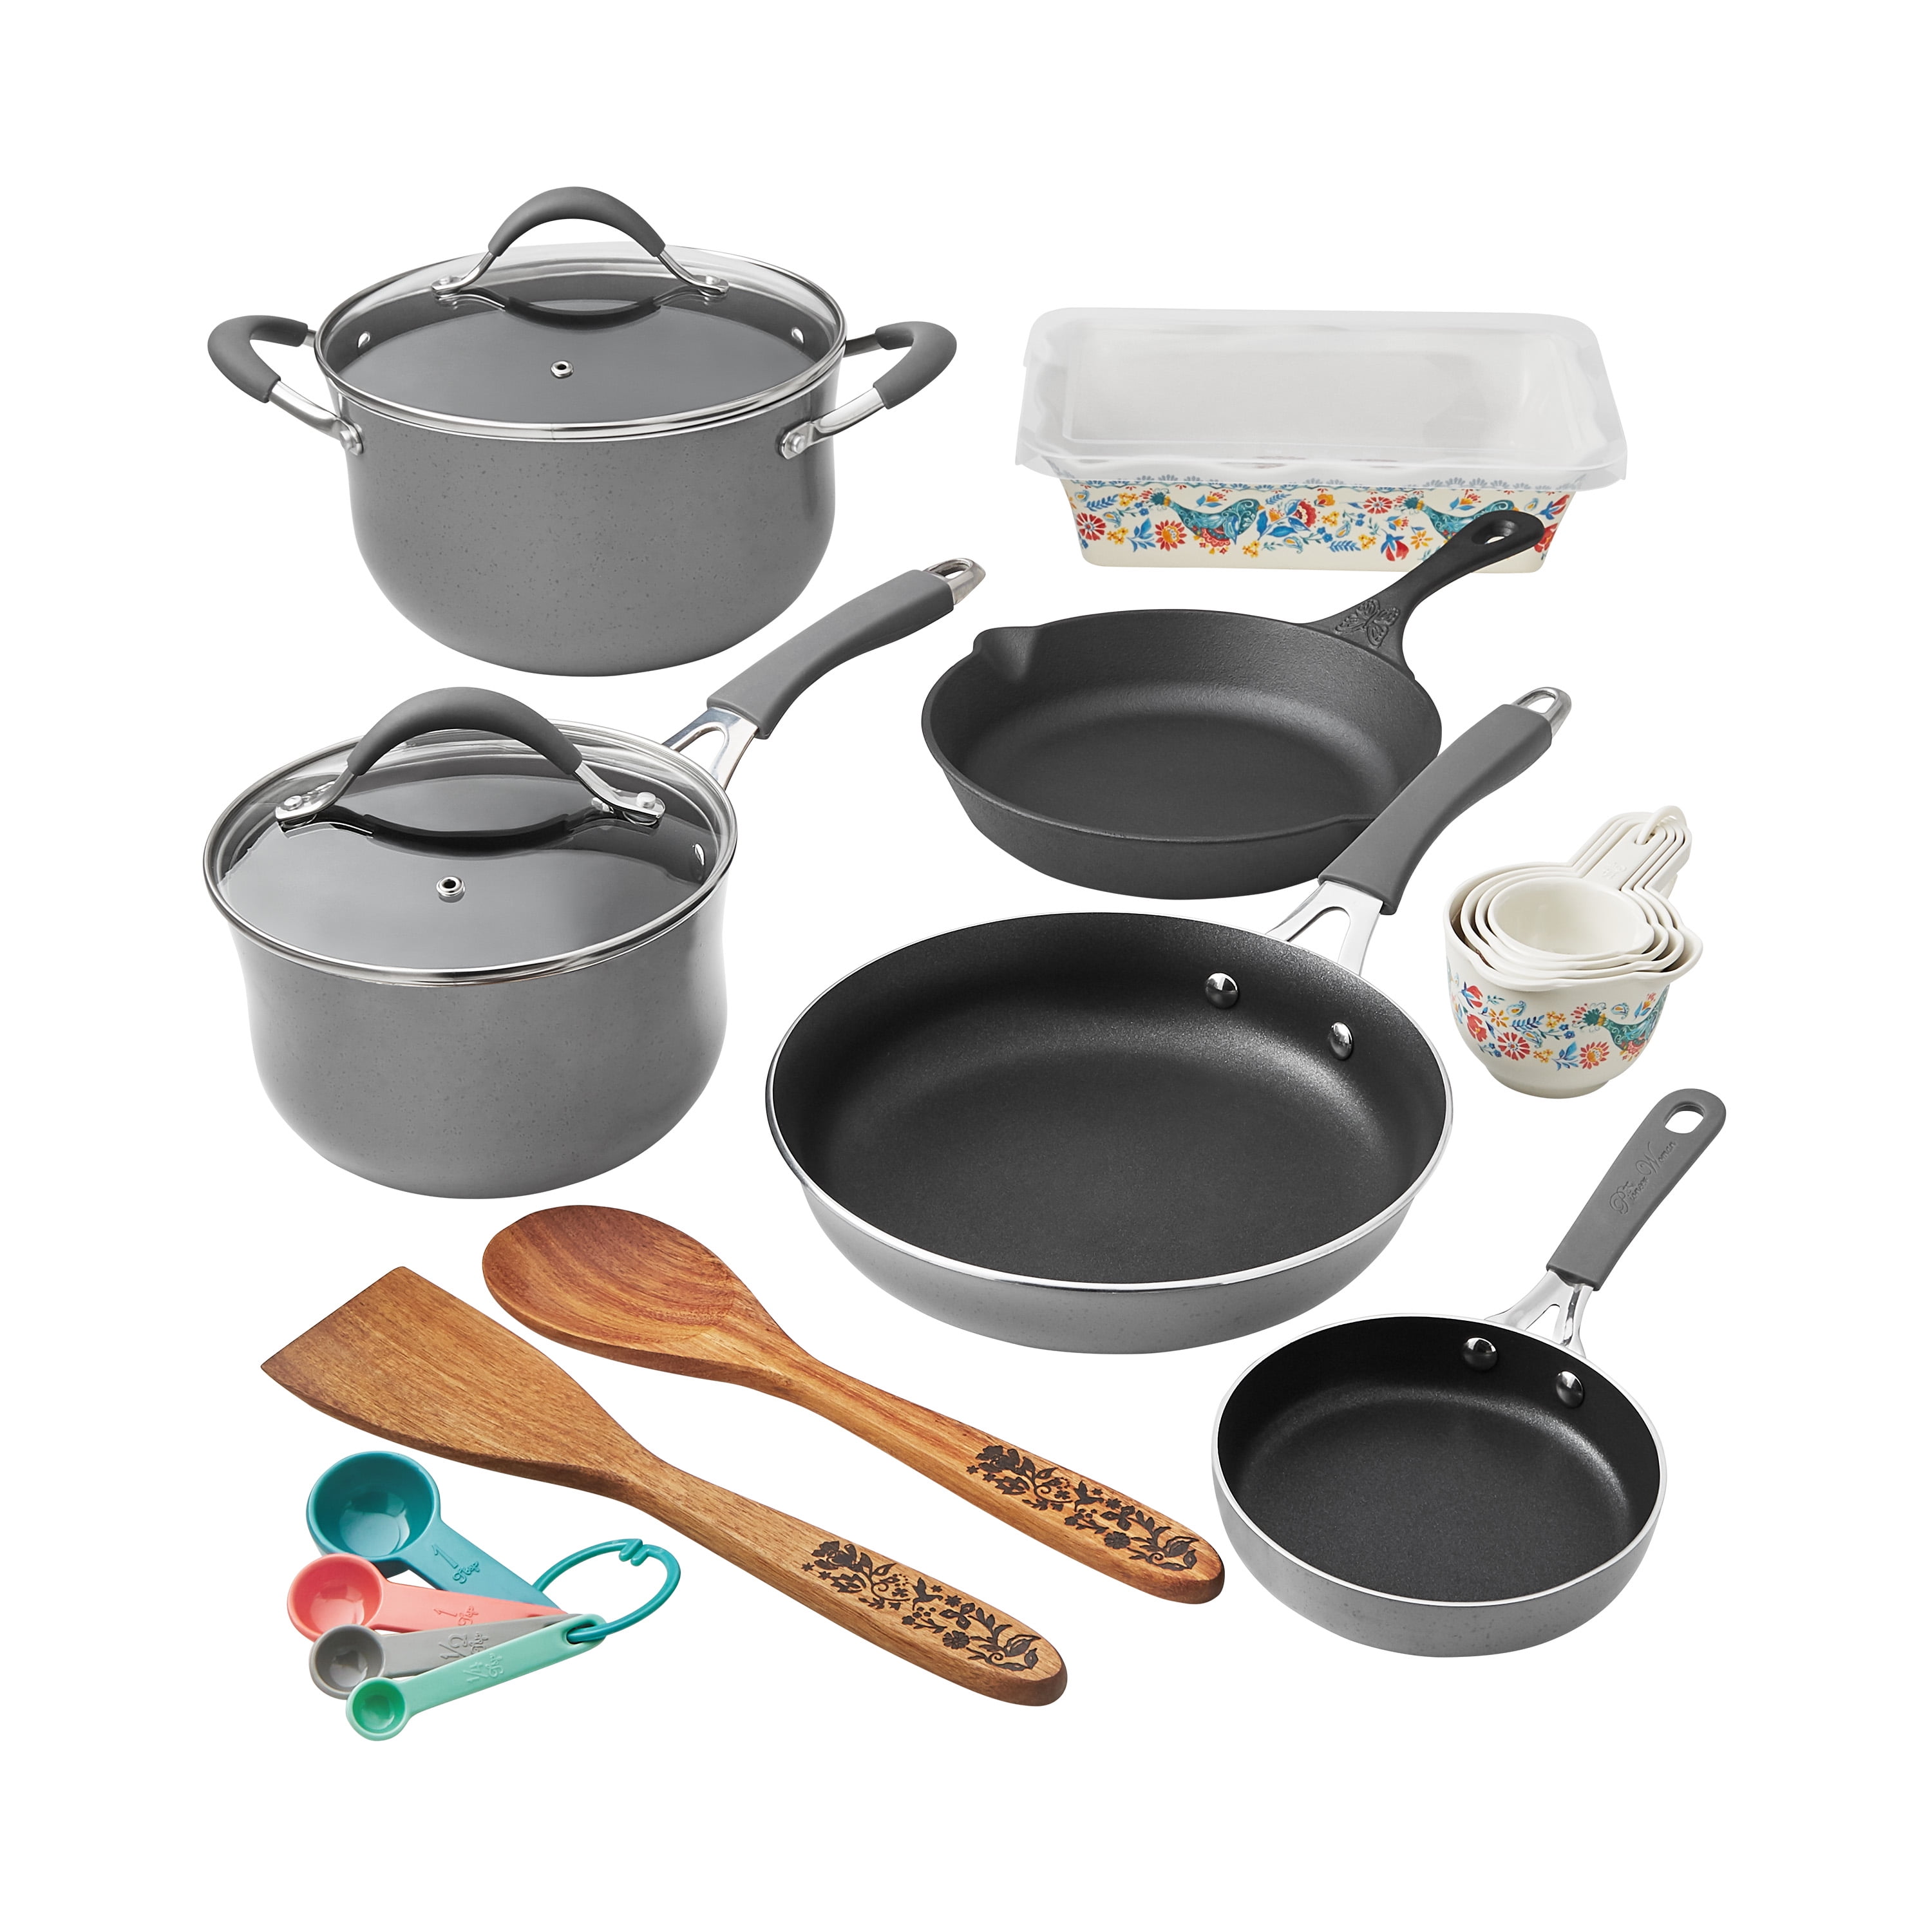 New Colors of the Pioneer Woman's Nonstick Cookware Just Dropped – SheKnows